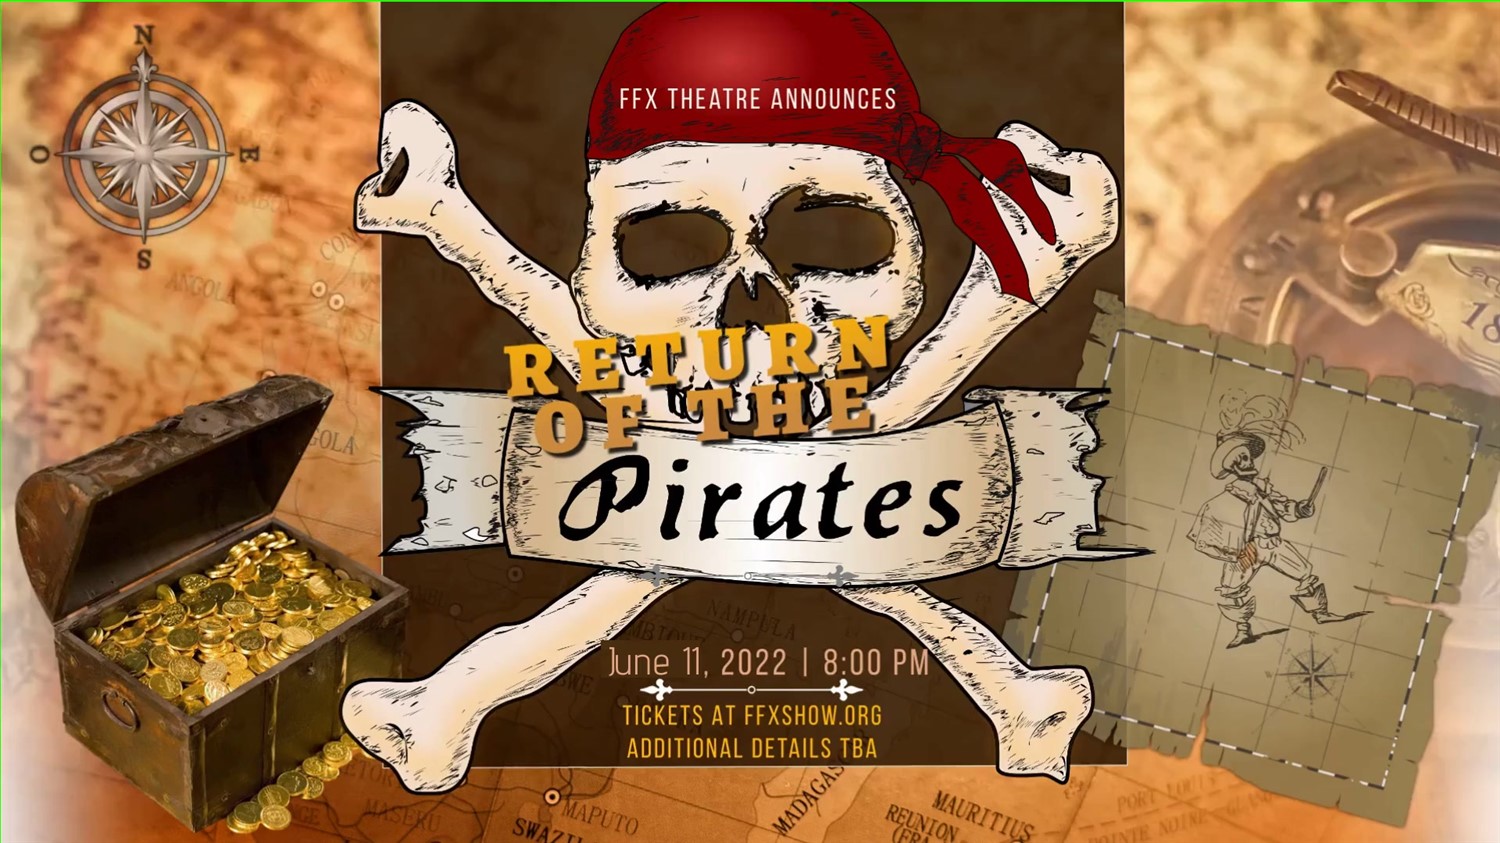 Return of the Pirates to FFX Sneaky Sneak Midweek Peek! on Jun 15, 20:00@FFX Theatre - Pick a seat, Buy tickets and Get information on Family Fun Xperience tickets.ffxshow.org